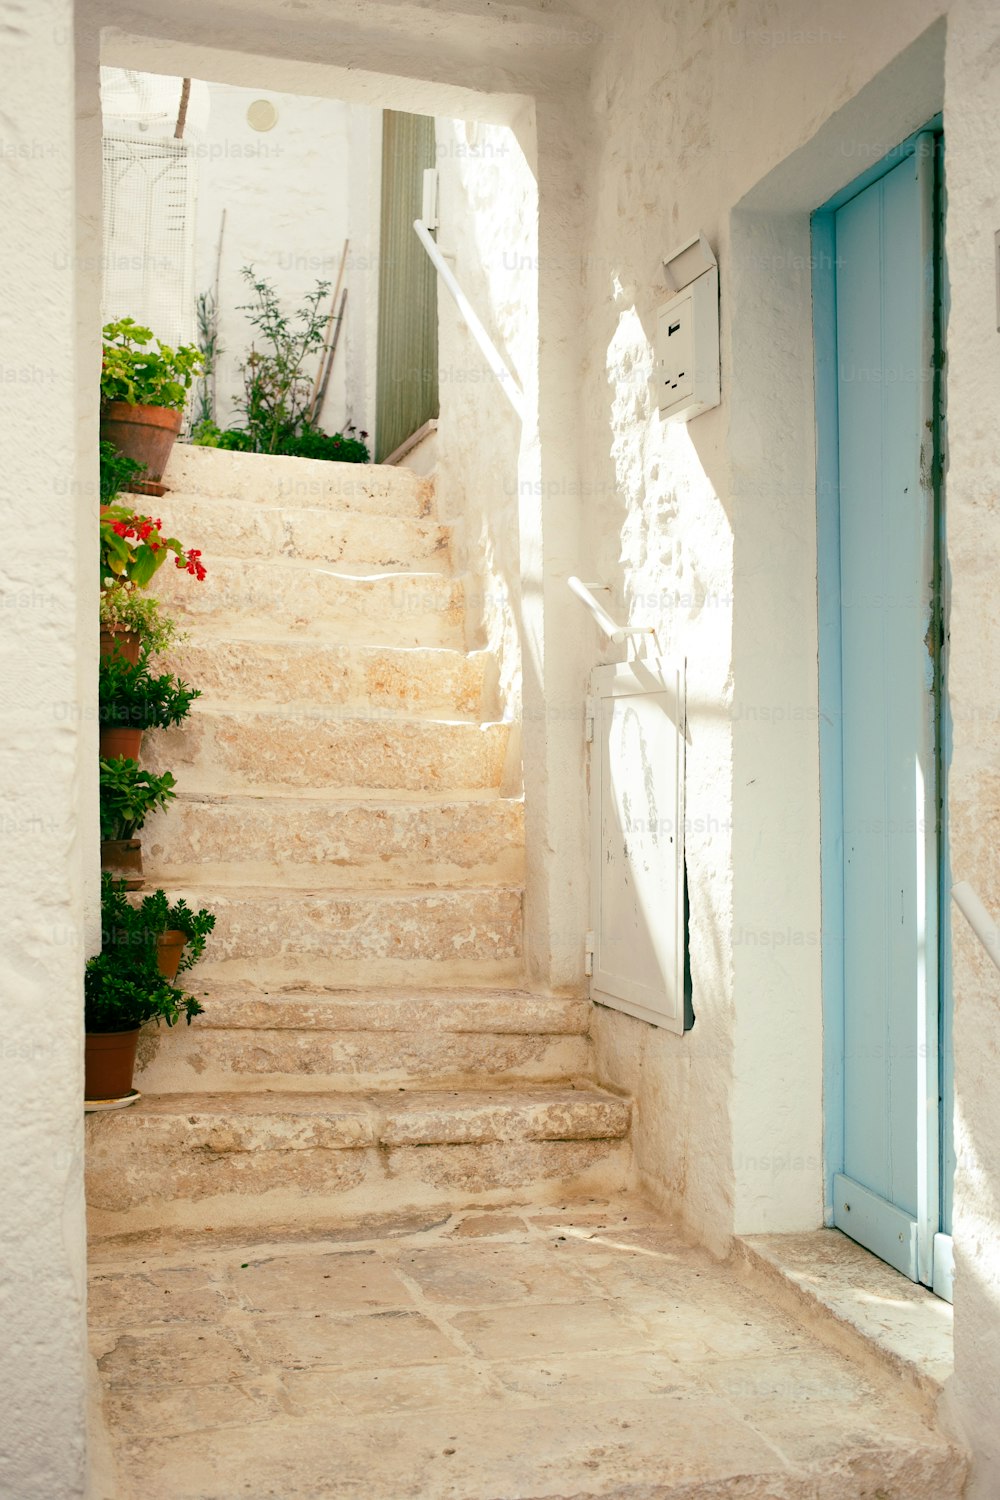 a set of stairs leading up to a blue door